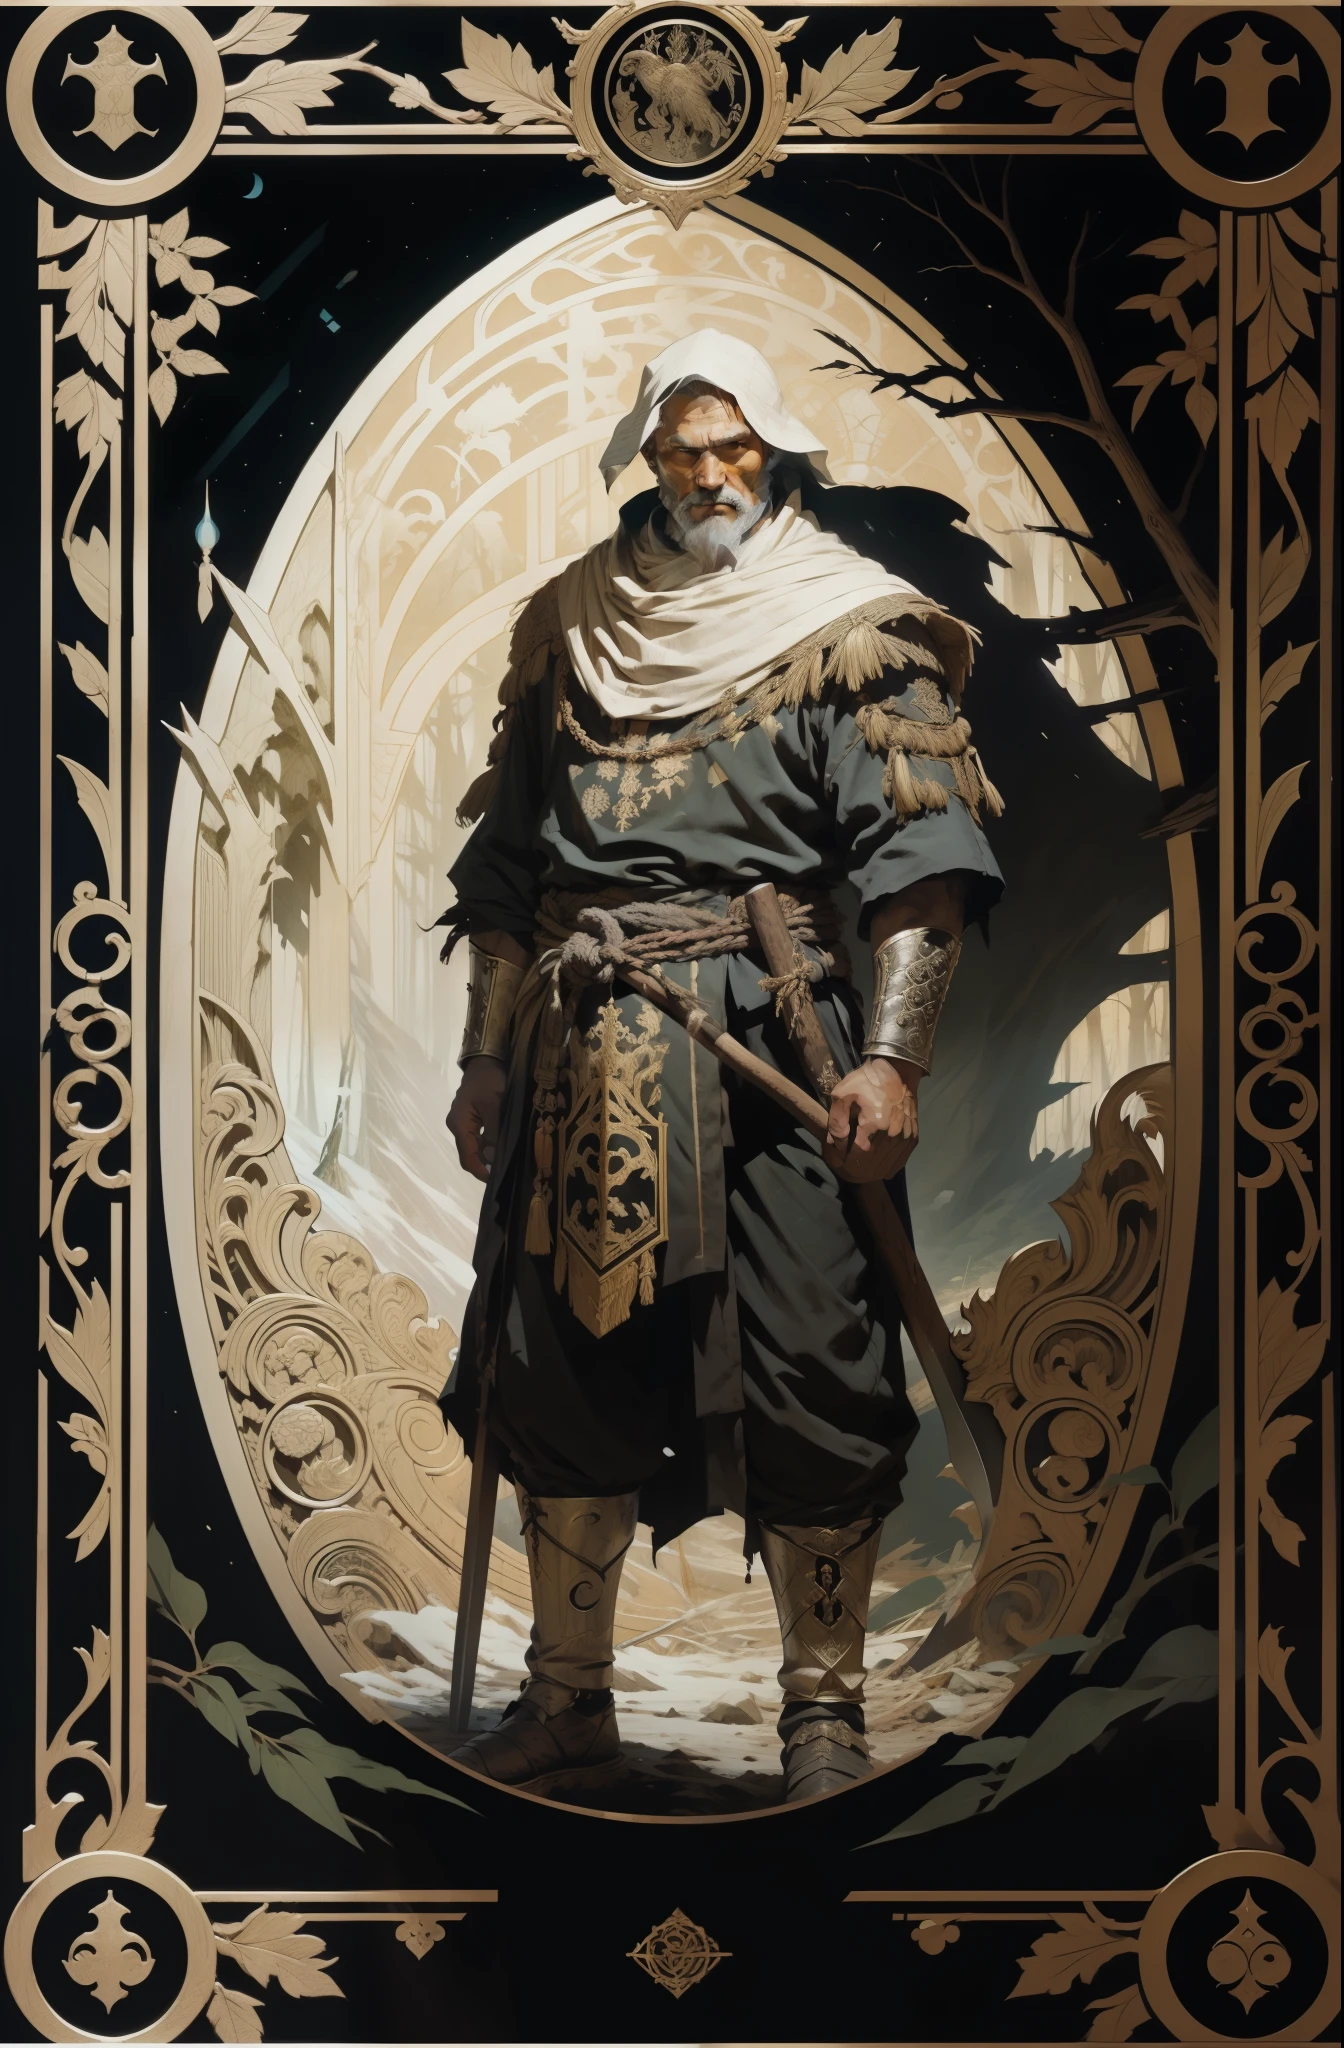 man, in traditional clothes of the peoples of the North, with an axe in his hands, dark forest background, tarot style, medieval patterned frame